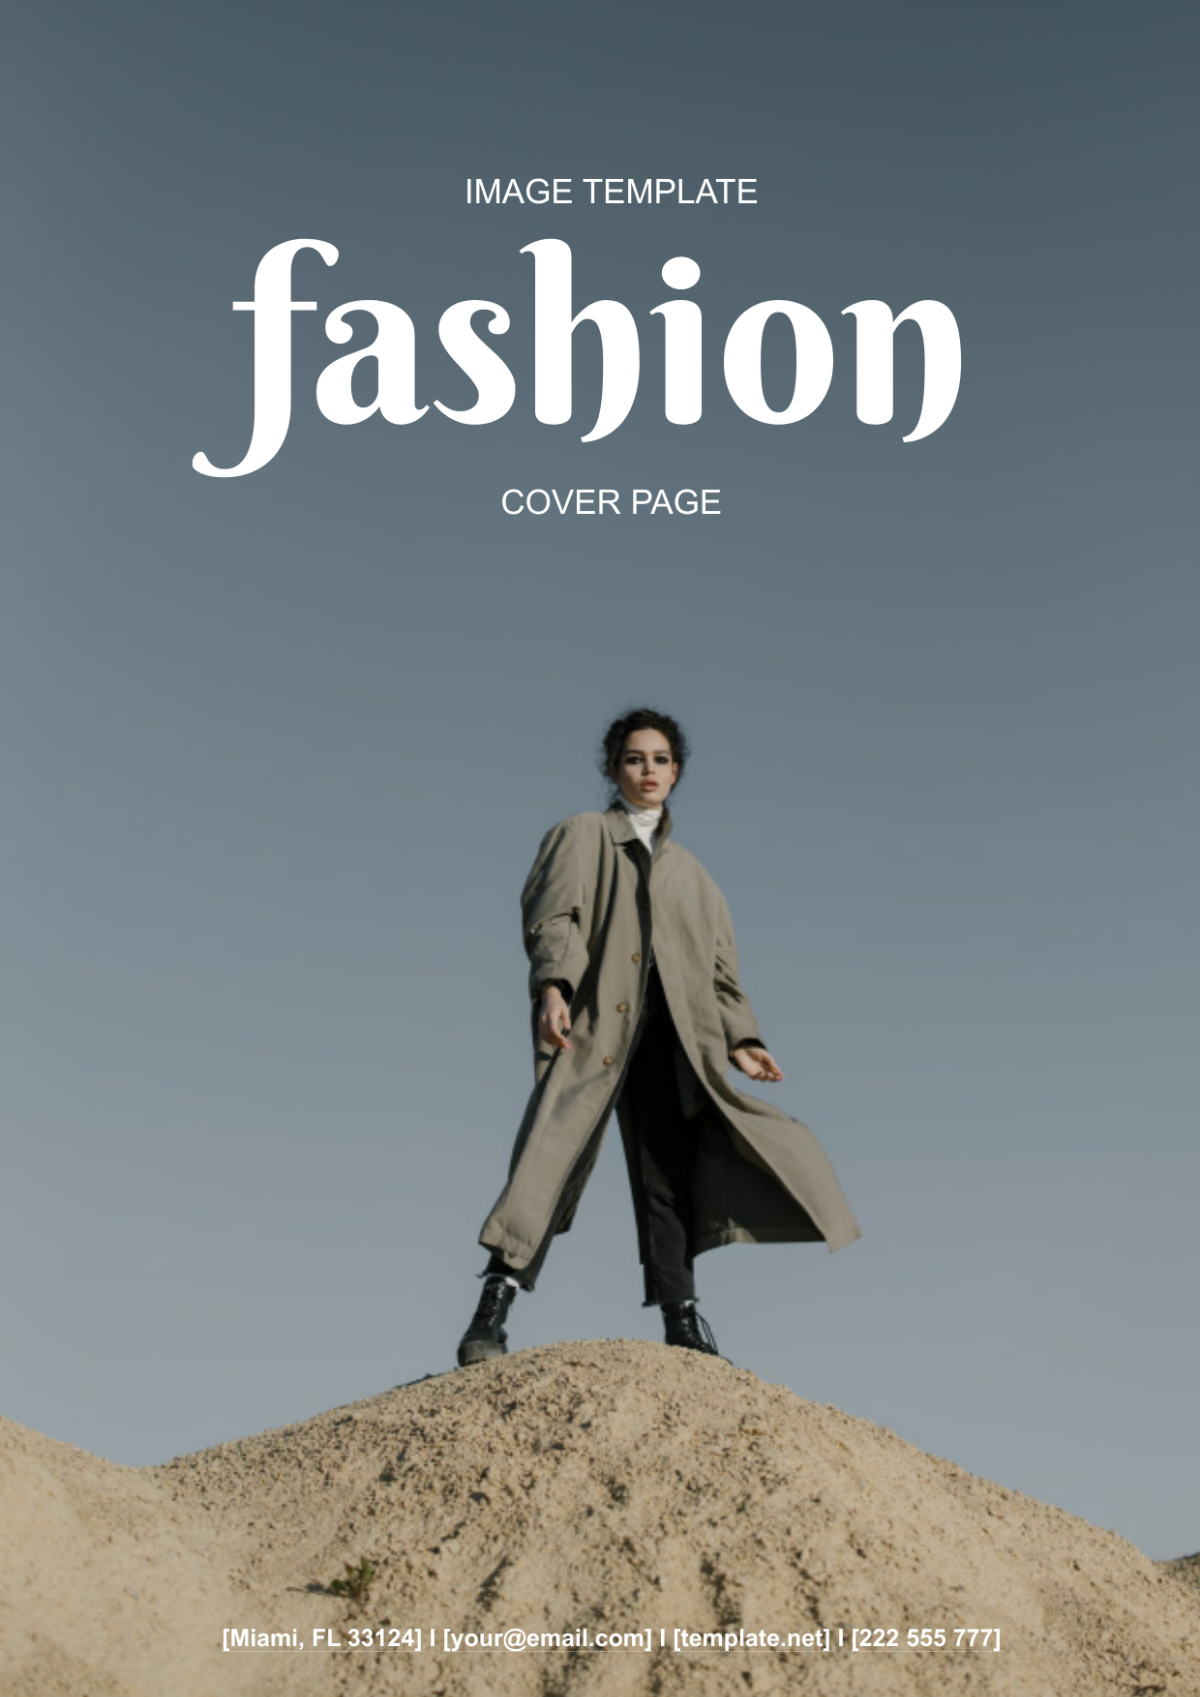 Fashion Cover Page Image Template